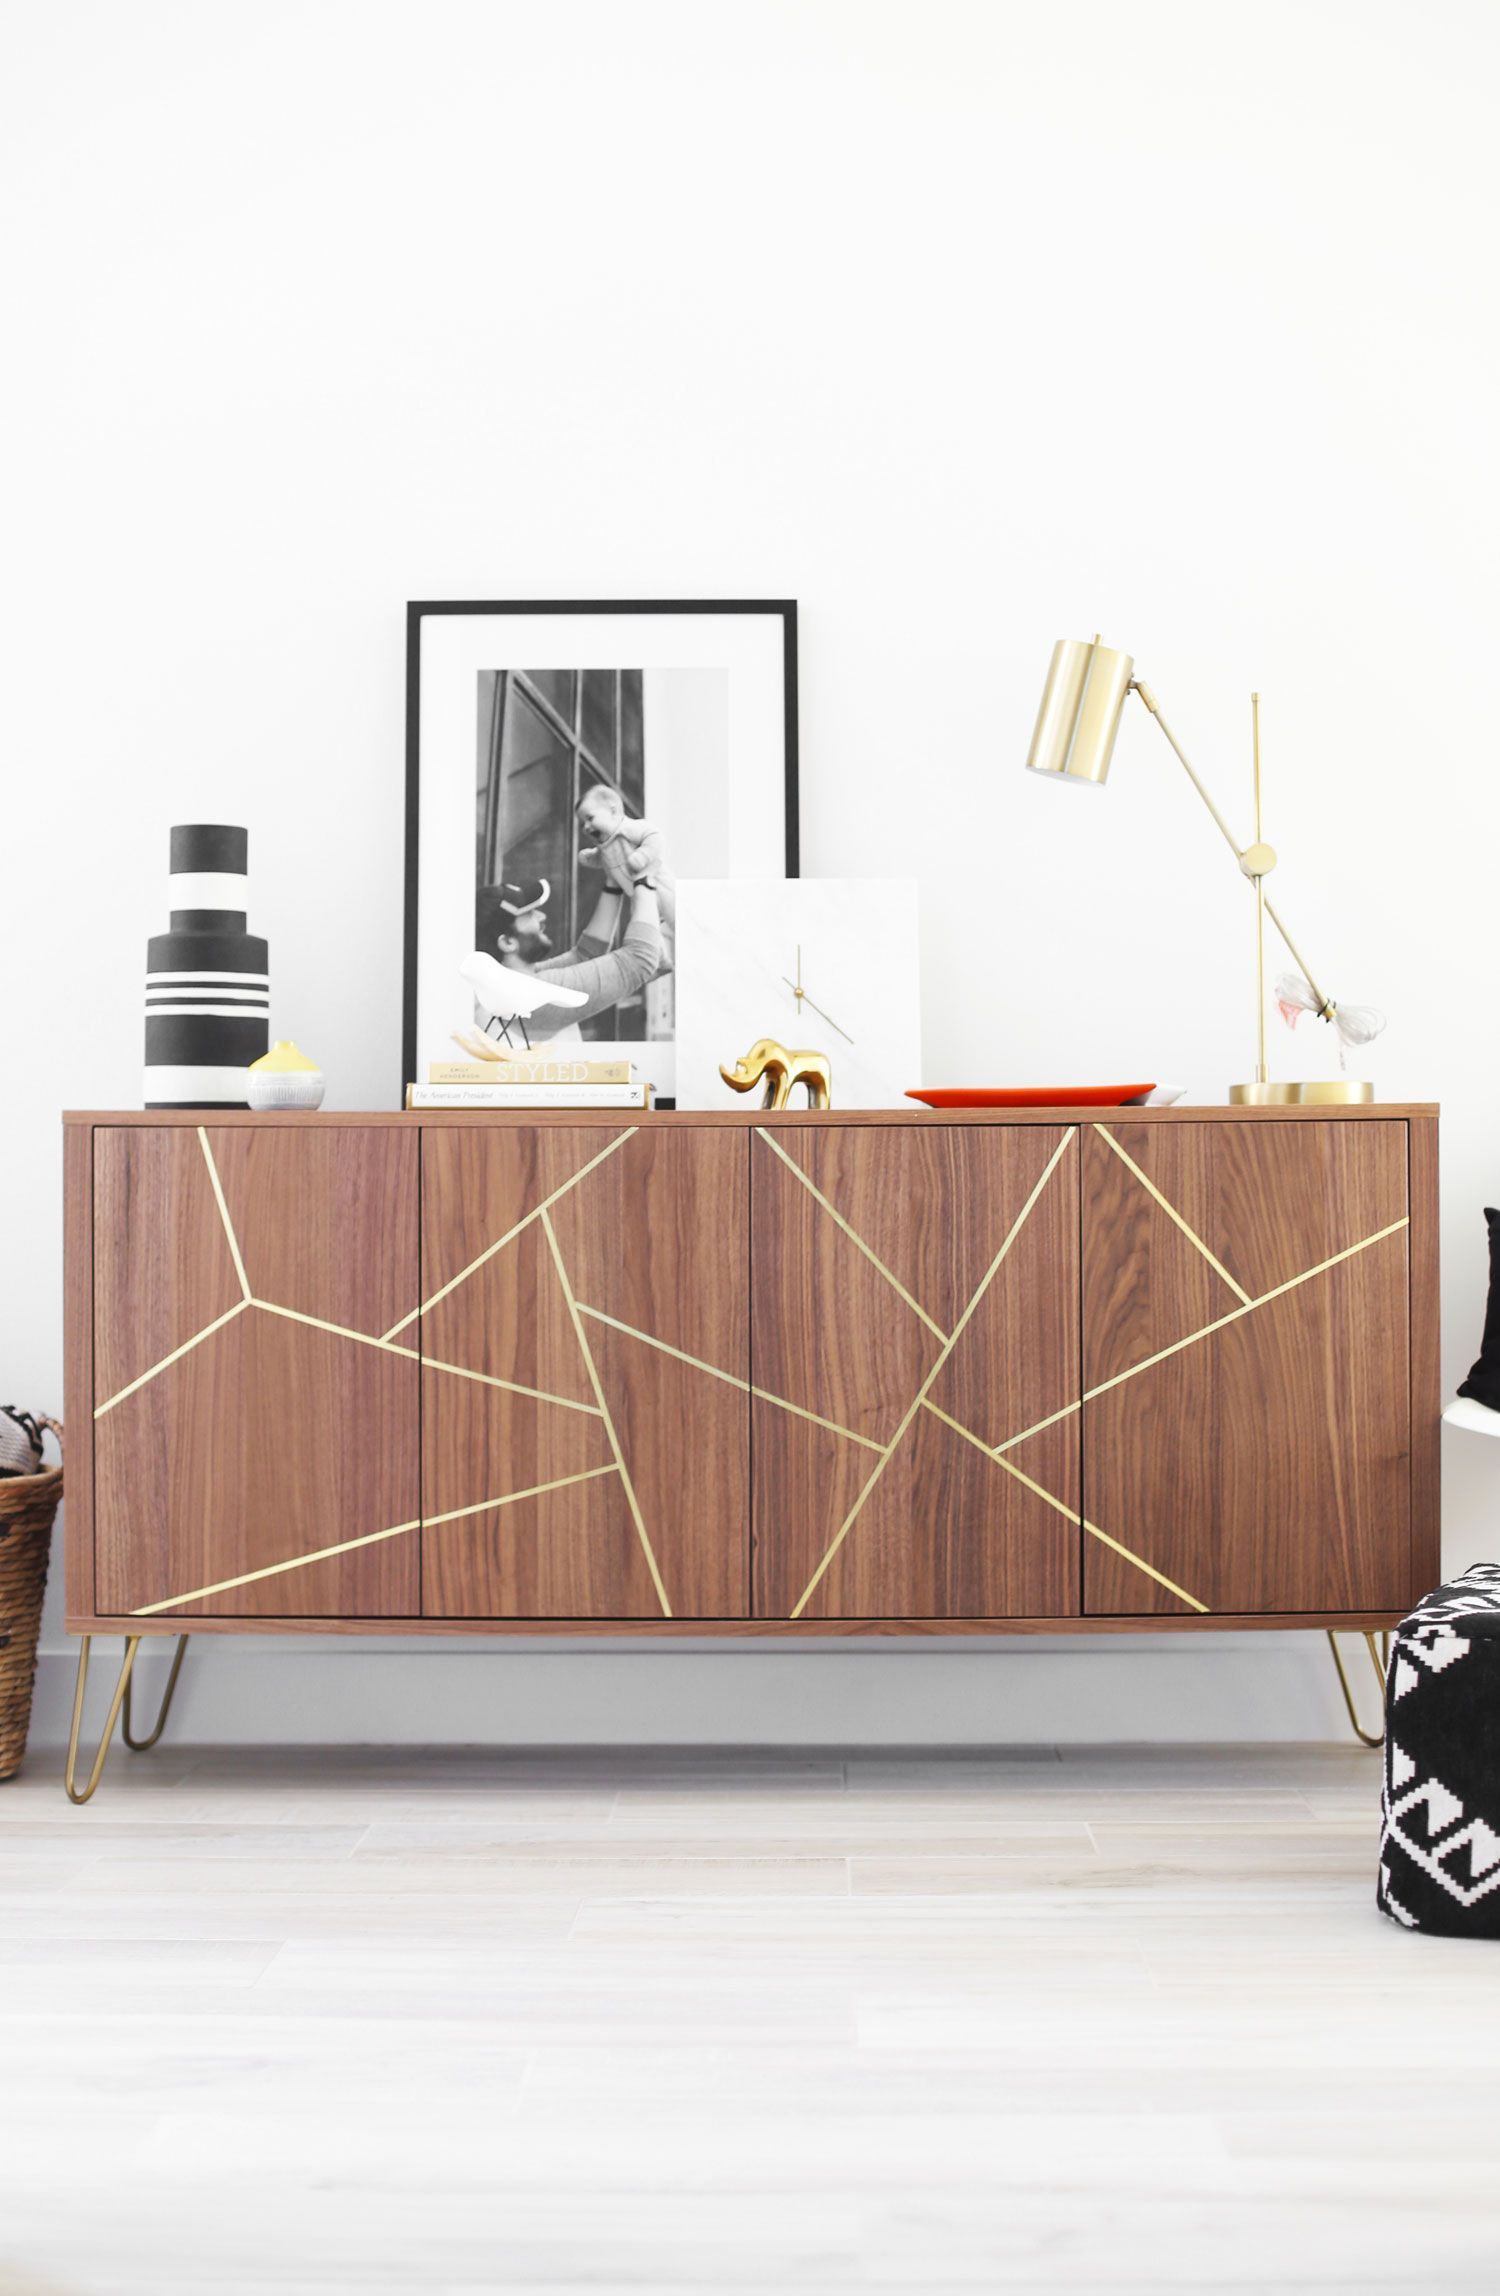 Aug 23 Mid Century Modern Ikea Hack Sideboard | Great Ideas With Exagonal Geometry Credenzas (View 19 of 30)